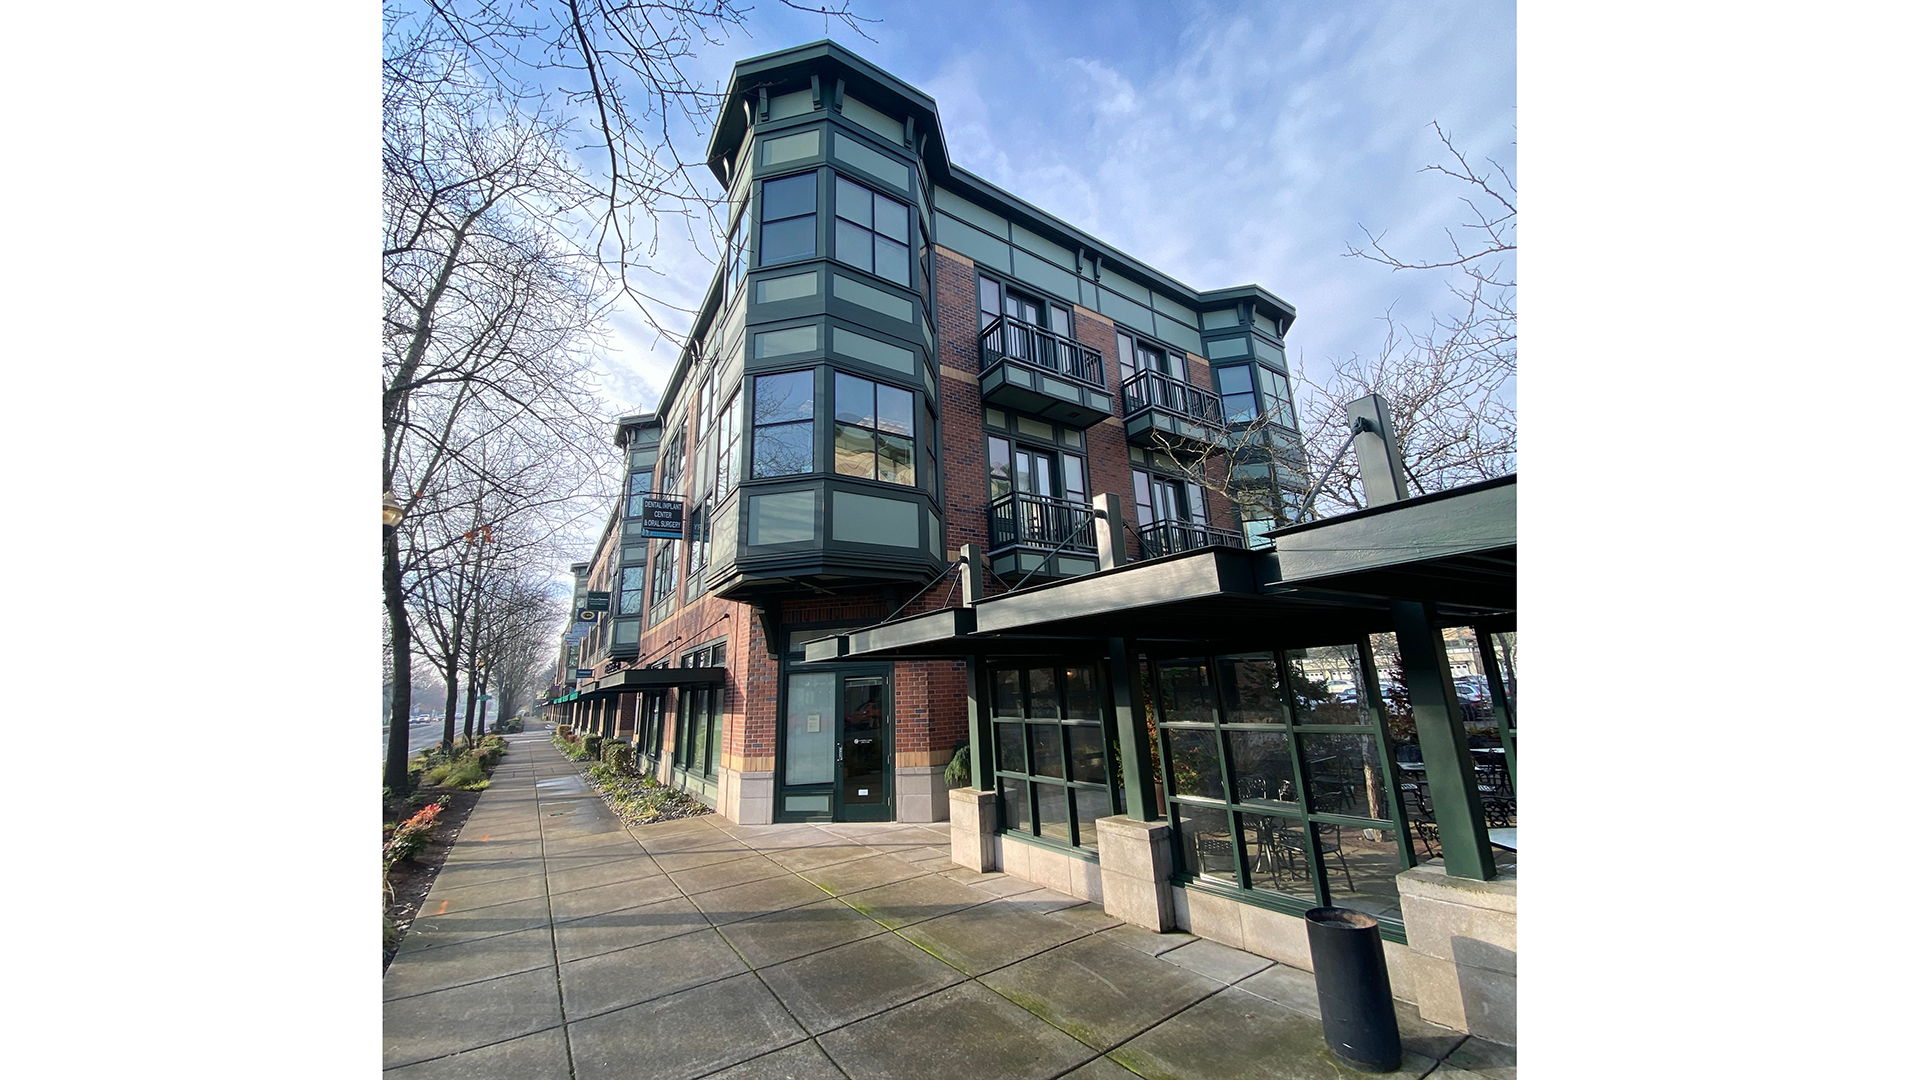 Sublease - Orenco Station